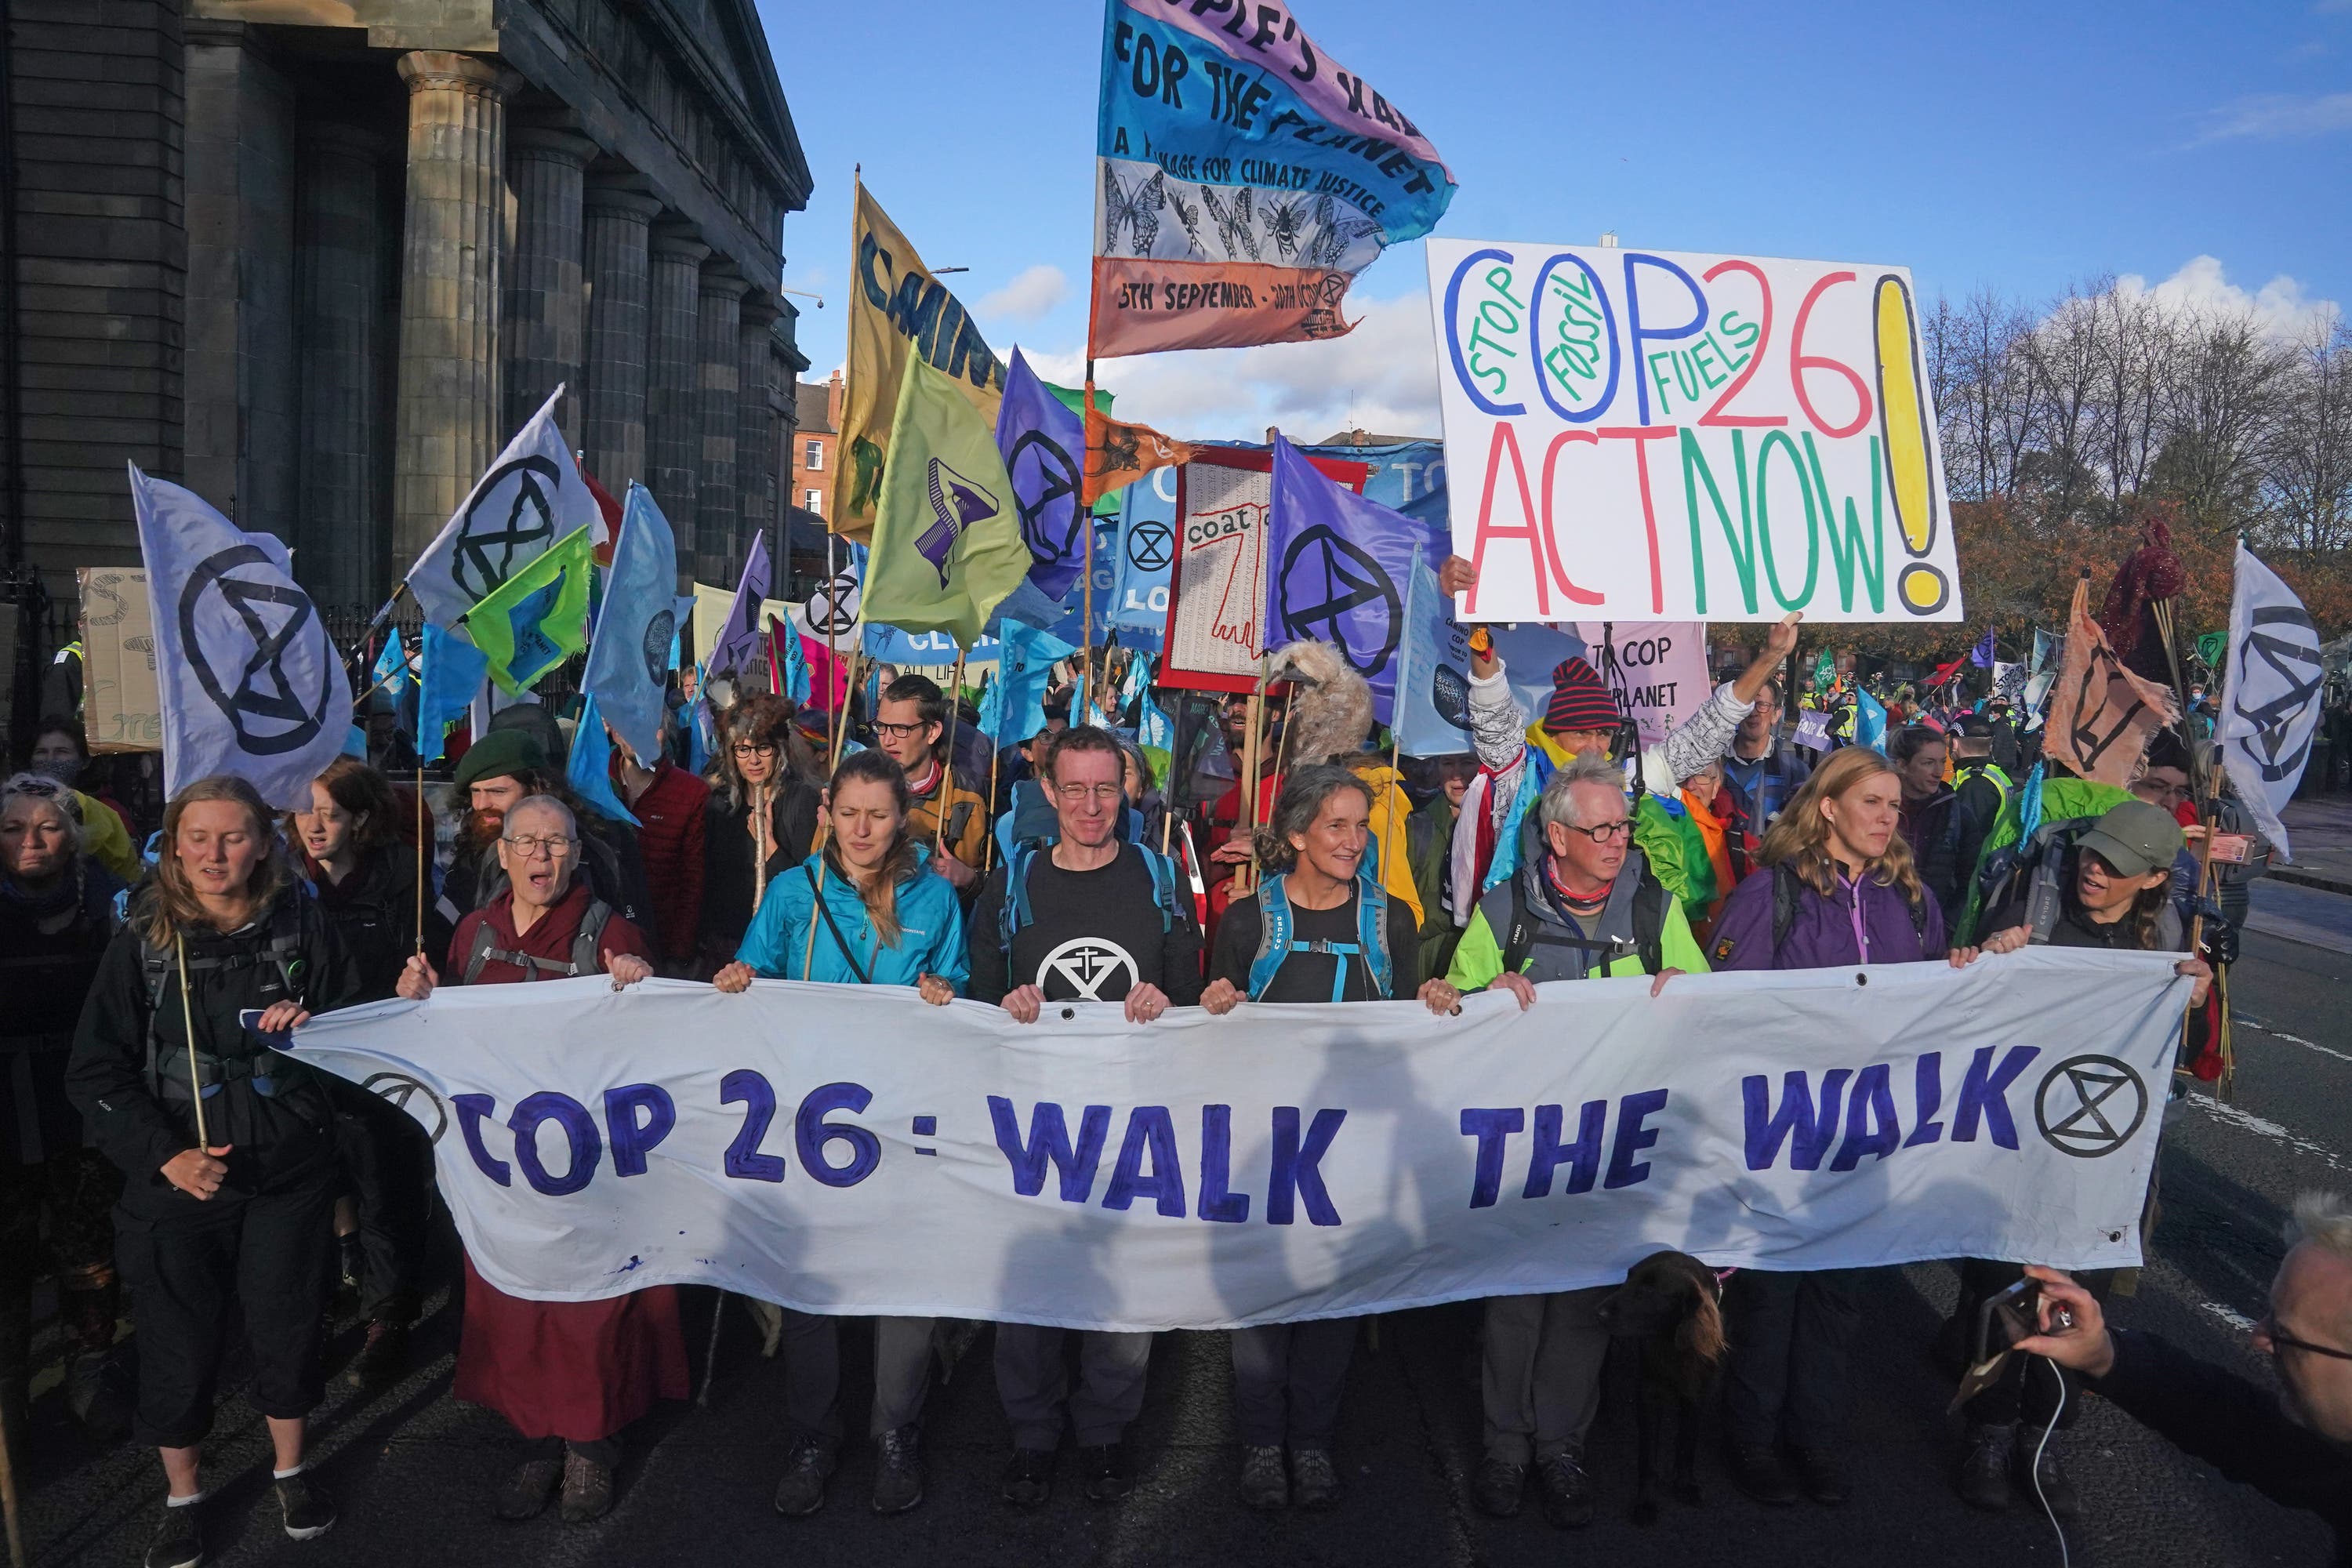 Many campaigners had walked thousands of miles to arrive in Glasgow in time for the start of the talks.